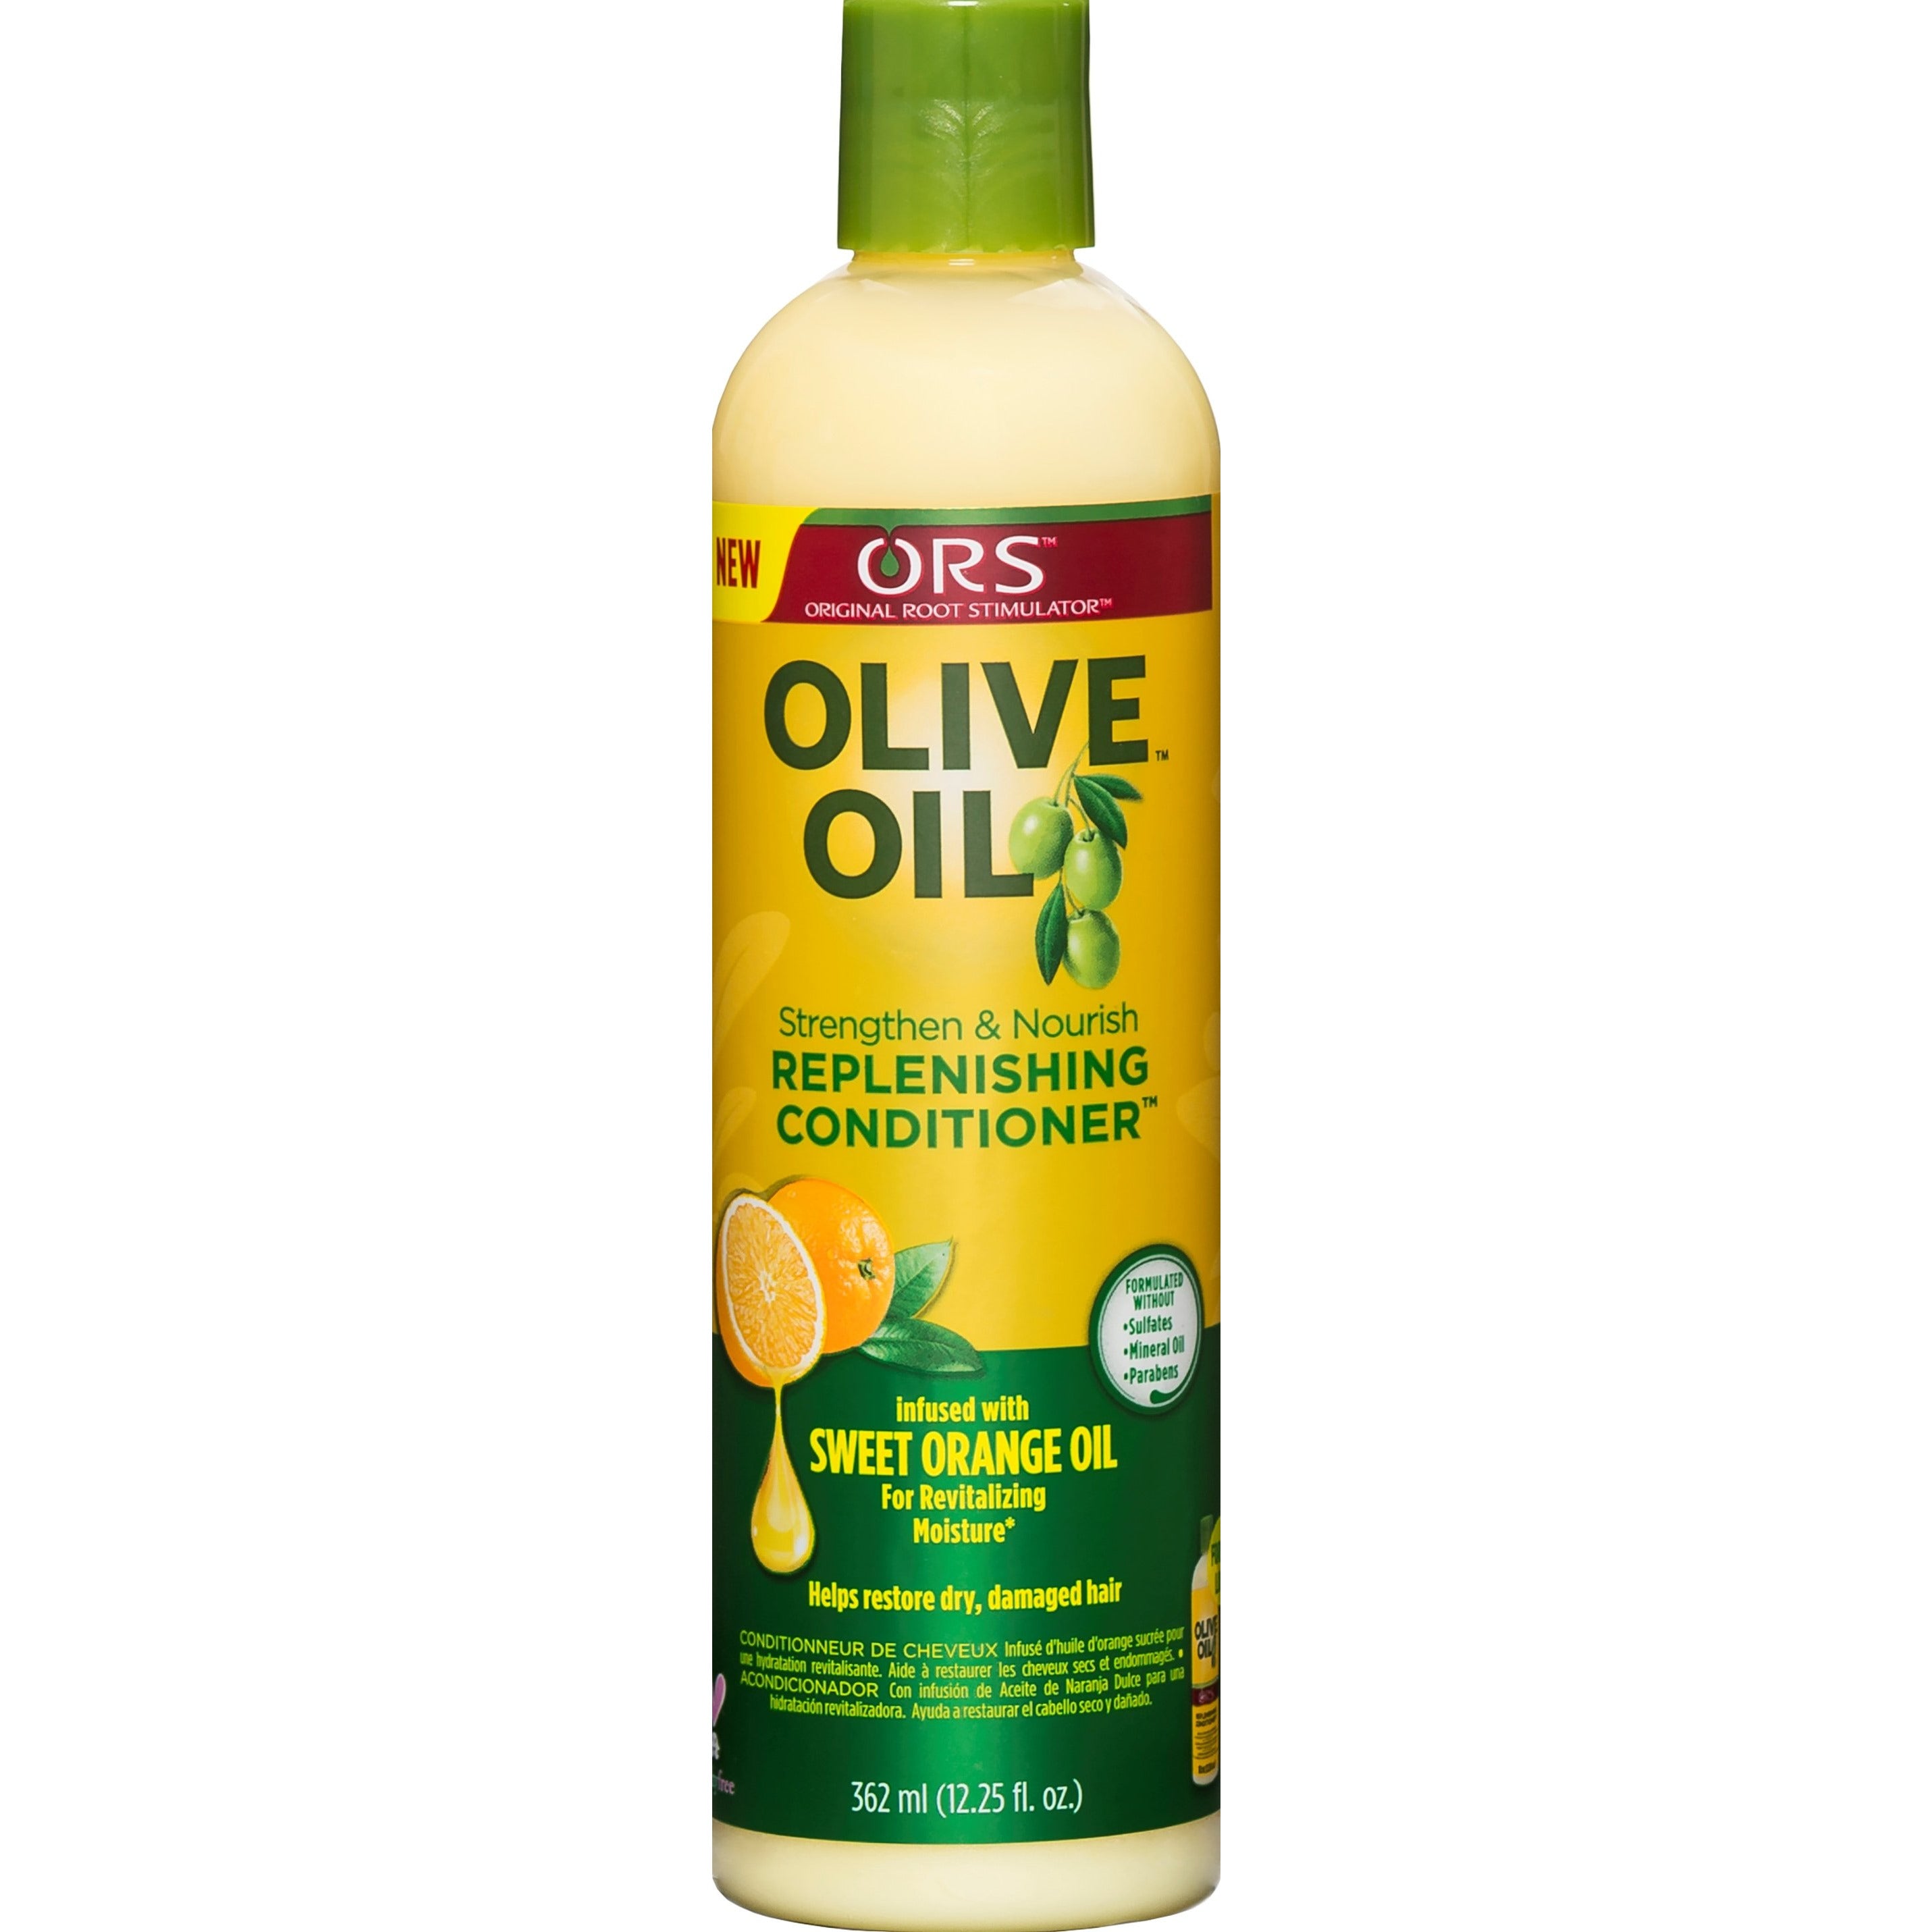 4th Ave Market: ORS Olive Oil Strengthen & Nourish Replenishing Conditioner